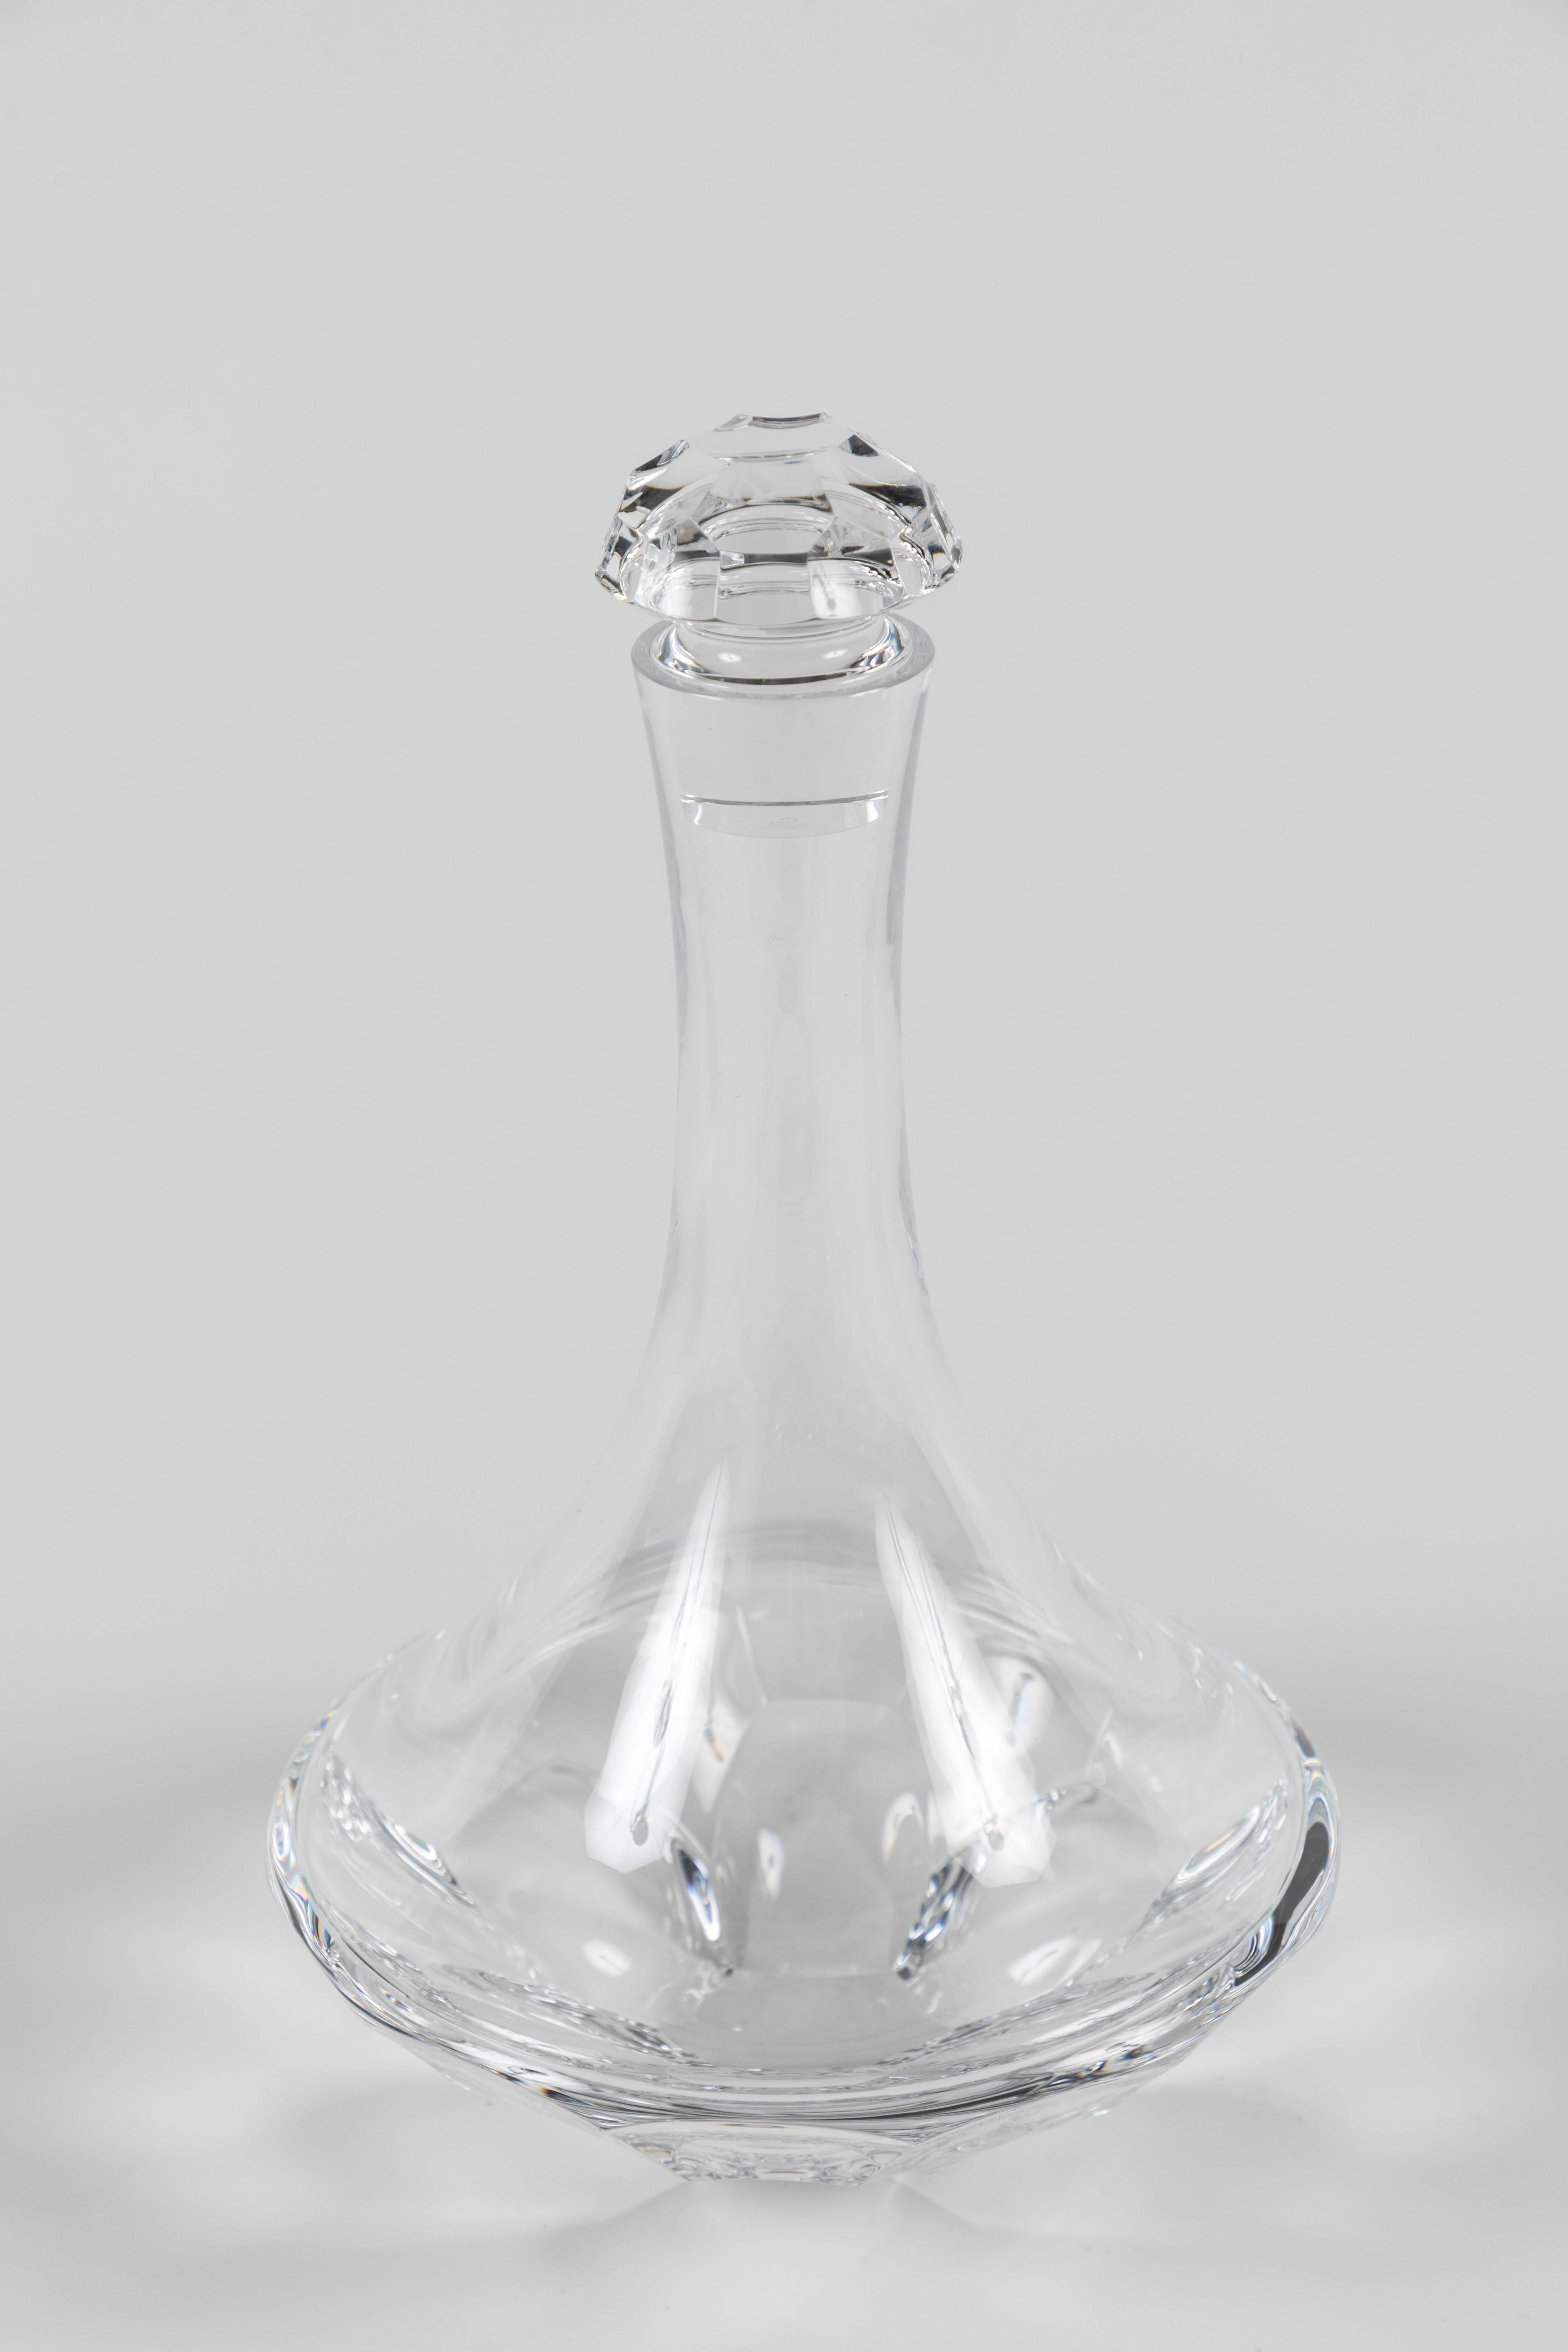 Designed by Ted Muehling in 2007 The Tortoise Decanter has a graceful, arcing shape like that of a traditional ship's decanter, with a wide base that lets the wine breathe, made with fine lead crystal for which Steuben is known. Retains the Steuben